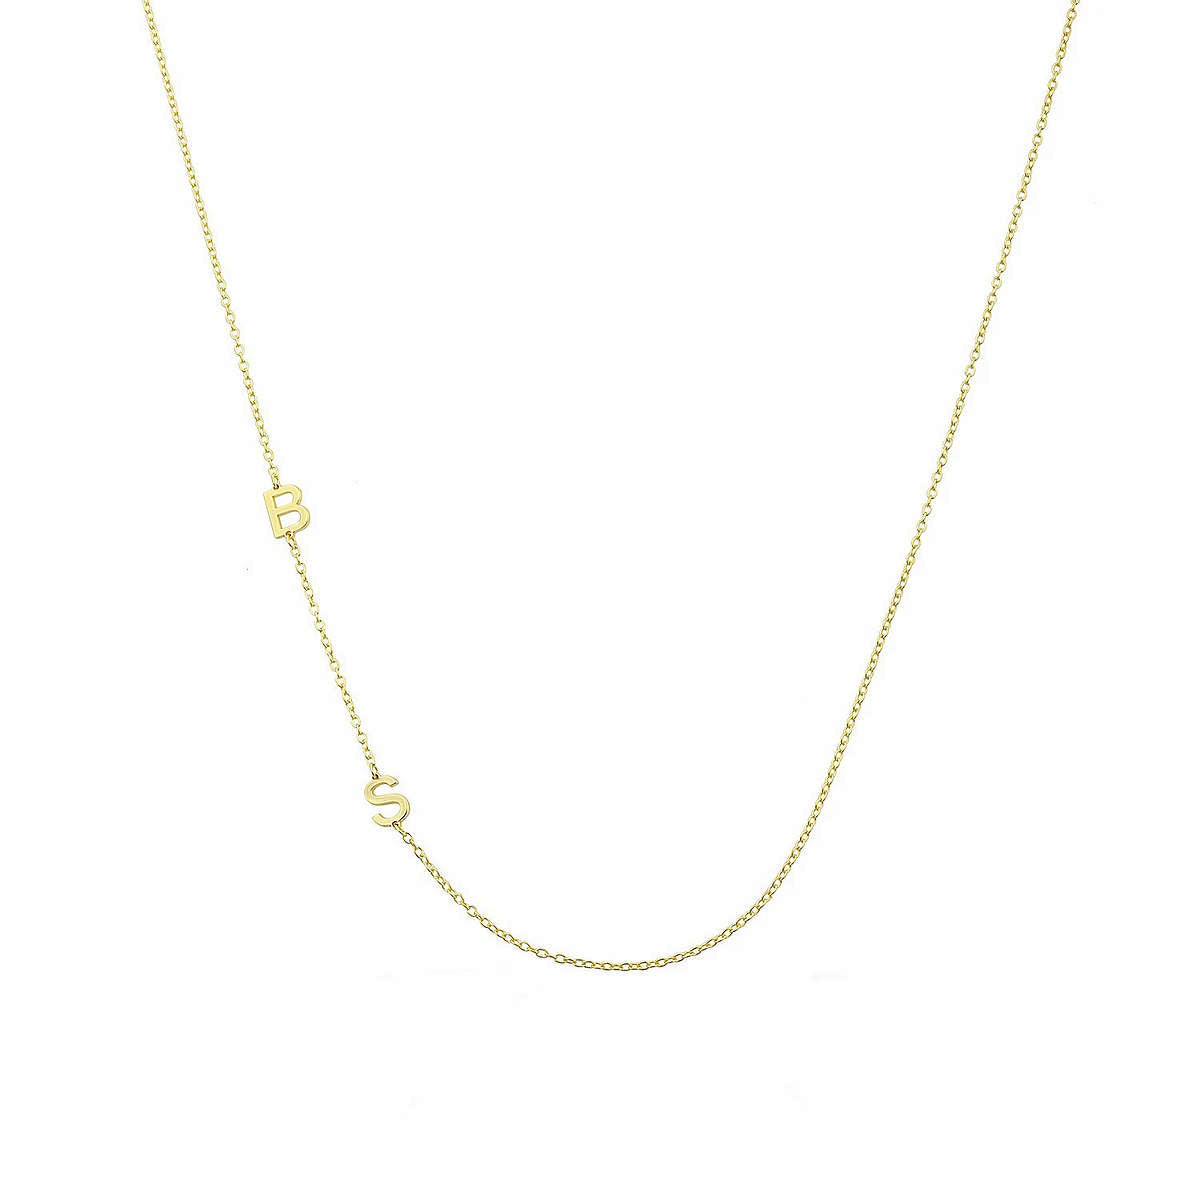 Under Her Spell Initial Necklace